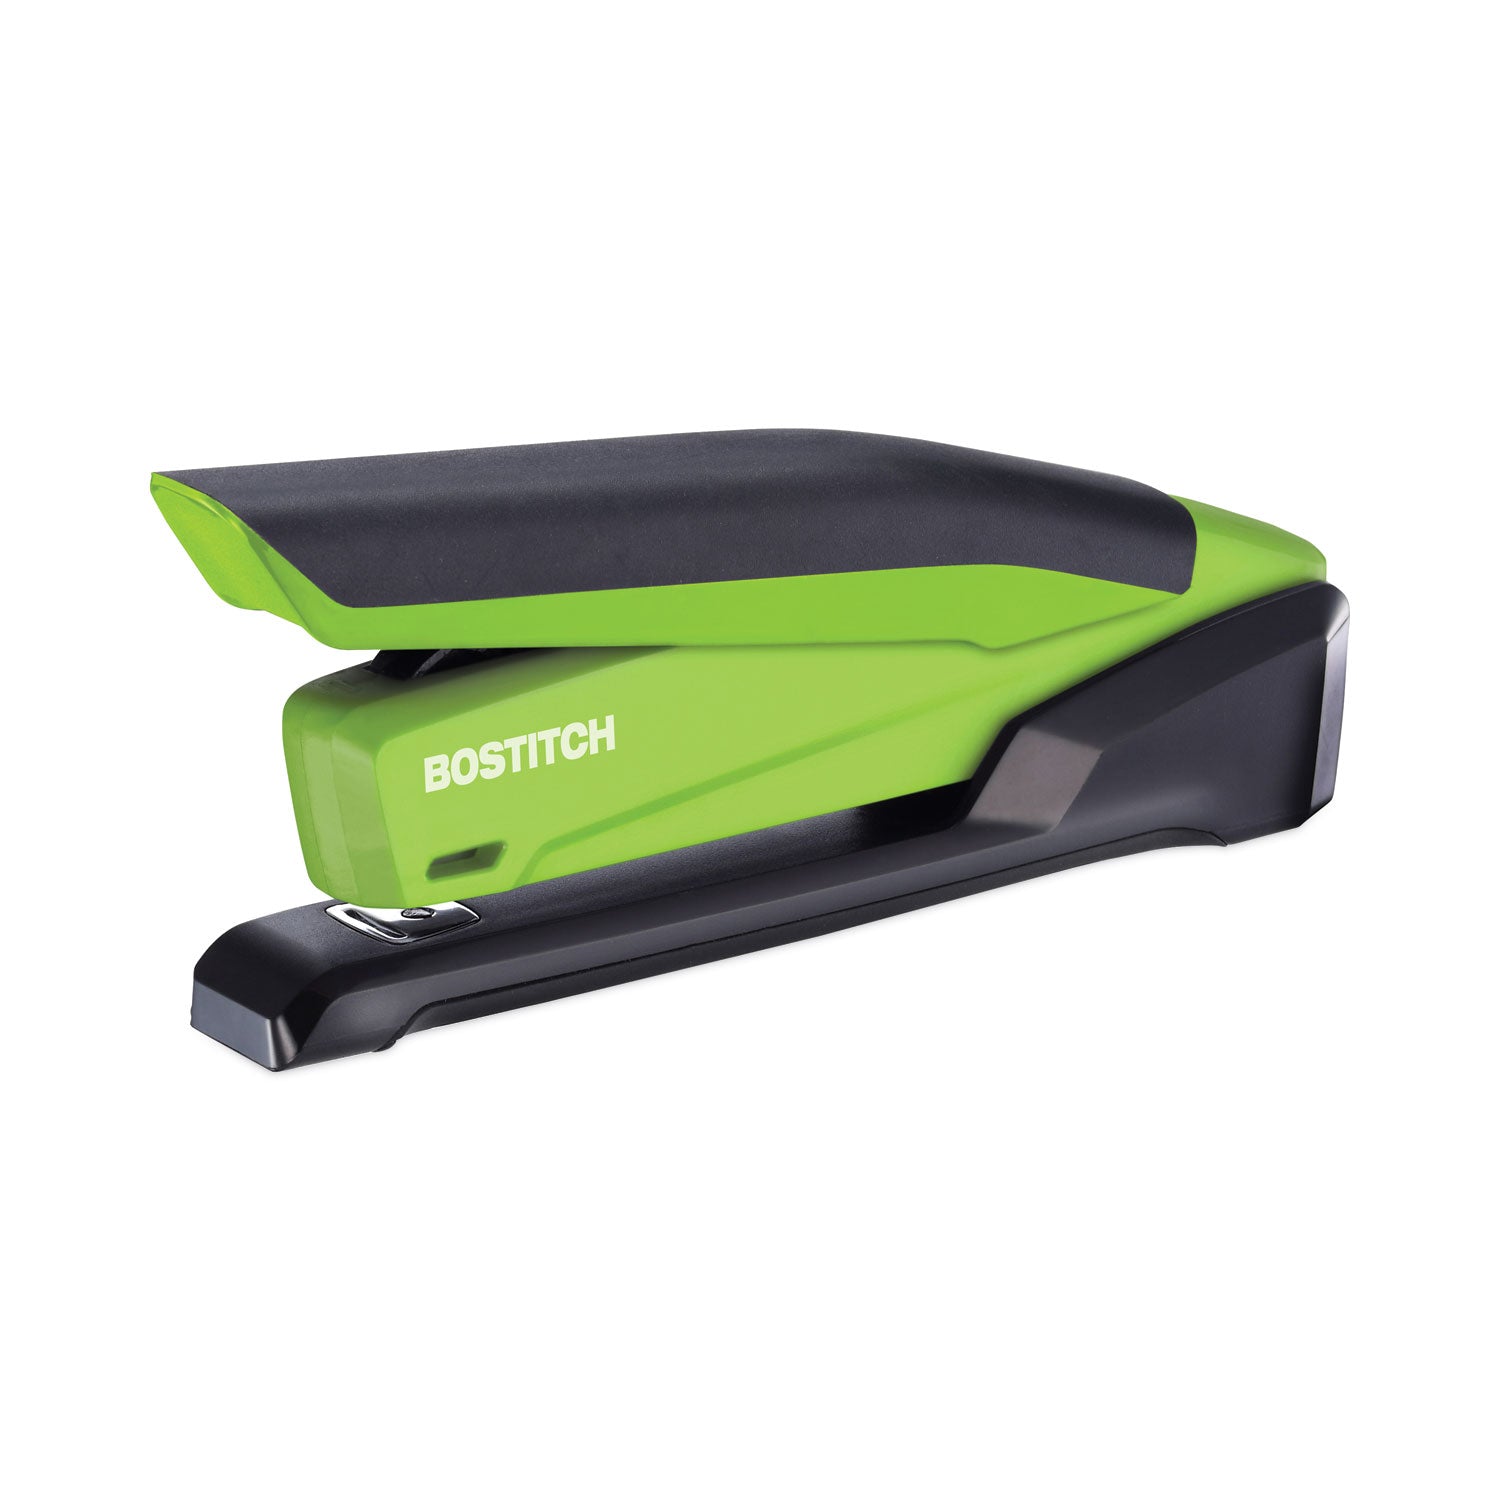 InPower One-Finger 3-in-1 Desktop Stapler with Antimicrobial Protection, 20-Sheet Capacity, Green/Black - 